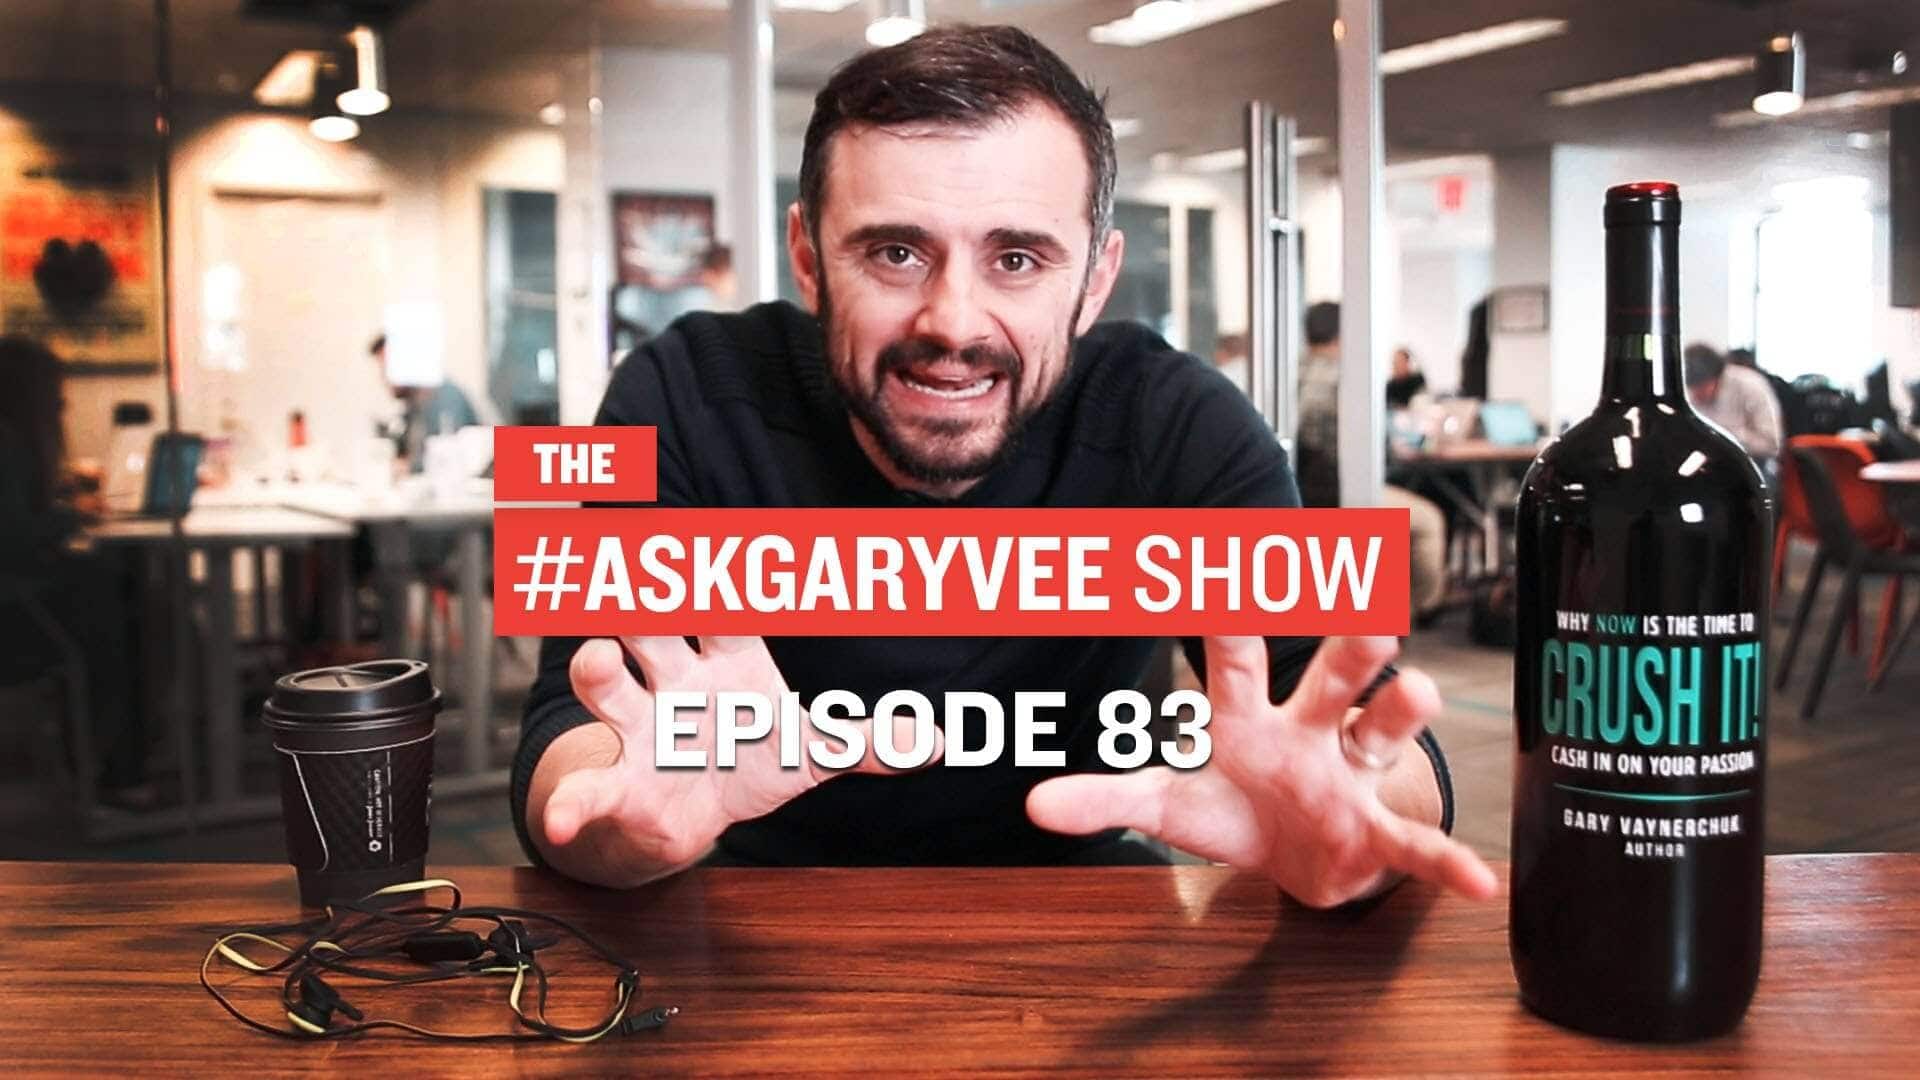 #AskGaryVee Episode 83: The Role of Blogging Today, Parenting in a Social Media World, & Sasquatch